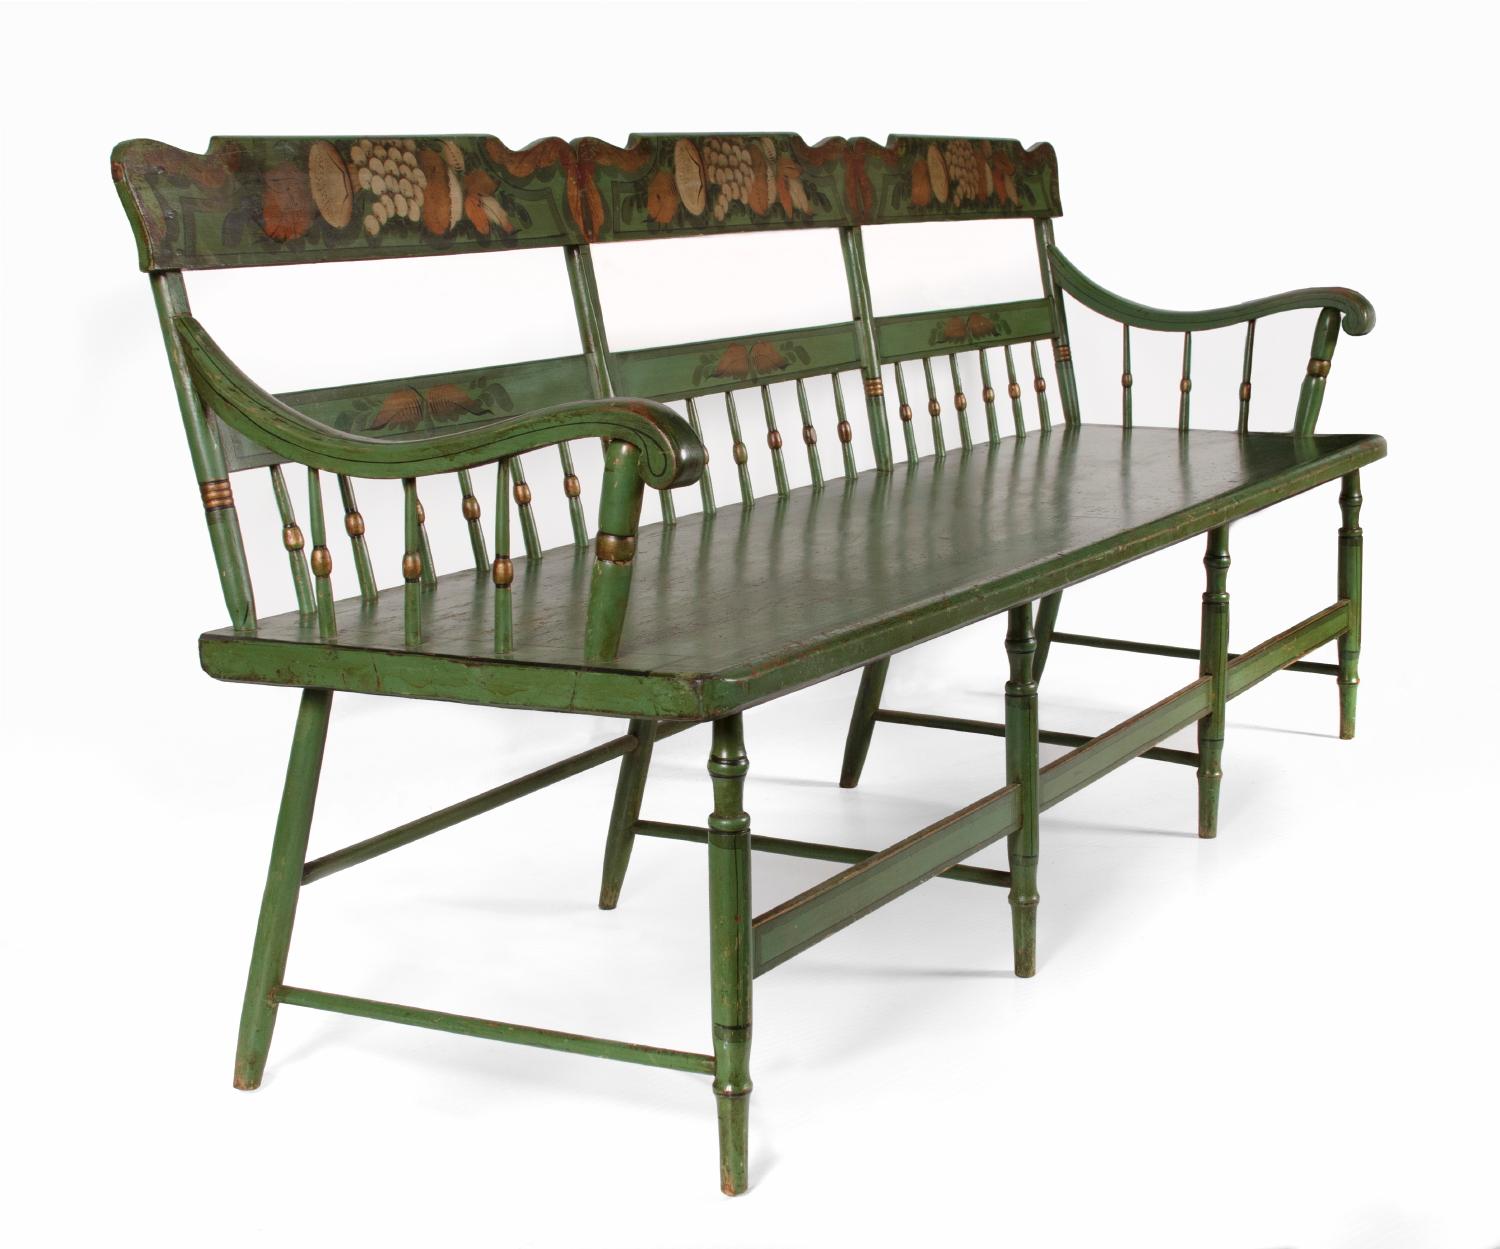 Mid-19th century, plank seat, paint-decorated settee in apple green with bell flowers, grapes & flora, 1845-1865

Paint-decorated, Pennsylvania, plank-seat settee of the mid-19th century (1845-65), in the half-spindle-back style with an angel wing